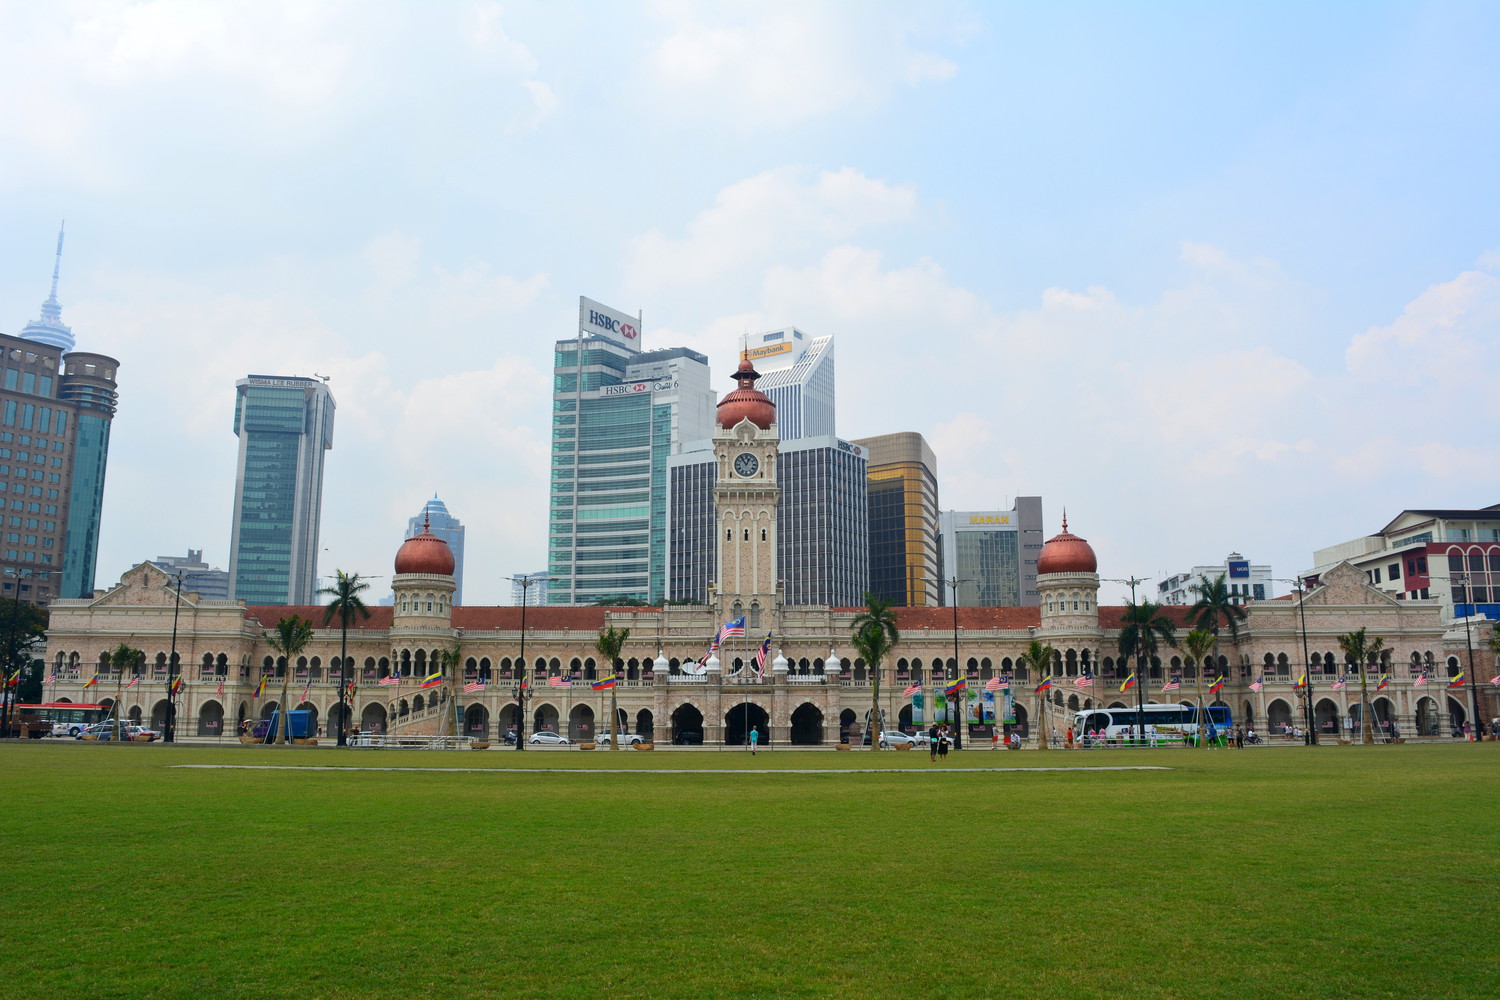 Sultan Abdul Samad Building that looks like a palace with green lawn in front of it